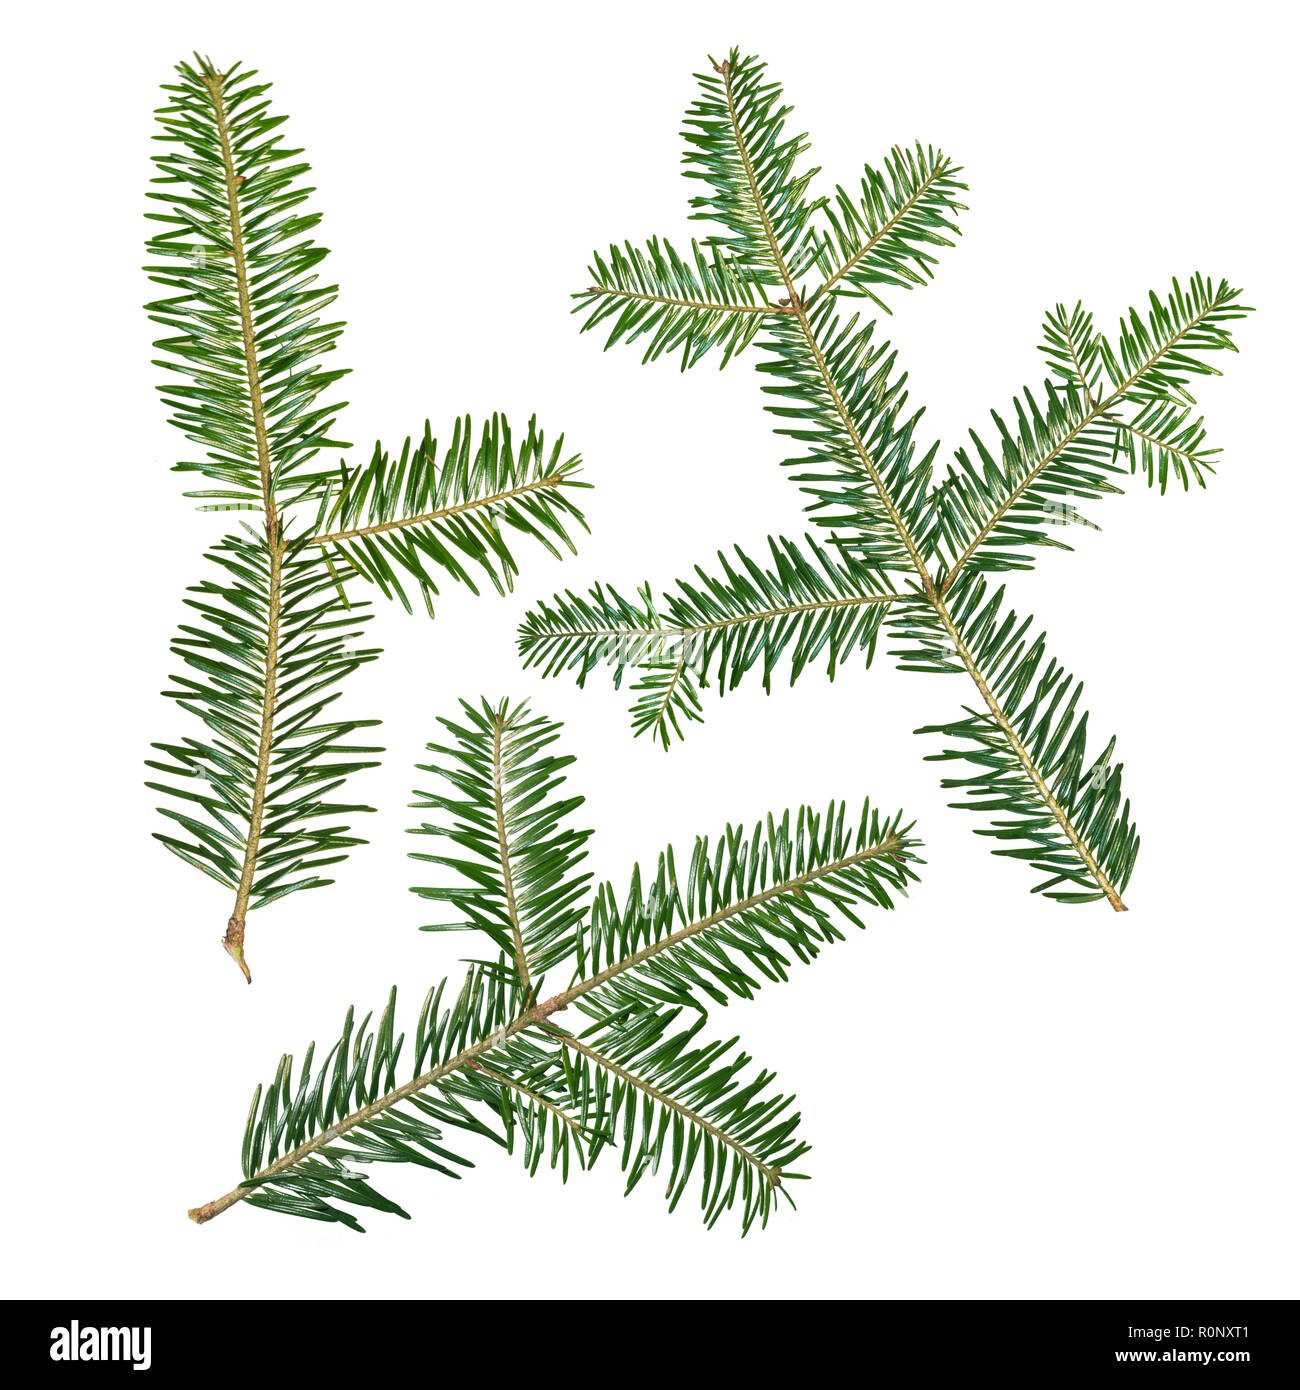 A fir tree Abies sibirica branch is isolated on a white background. Stock Photo